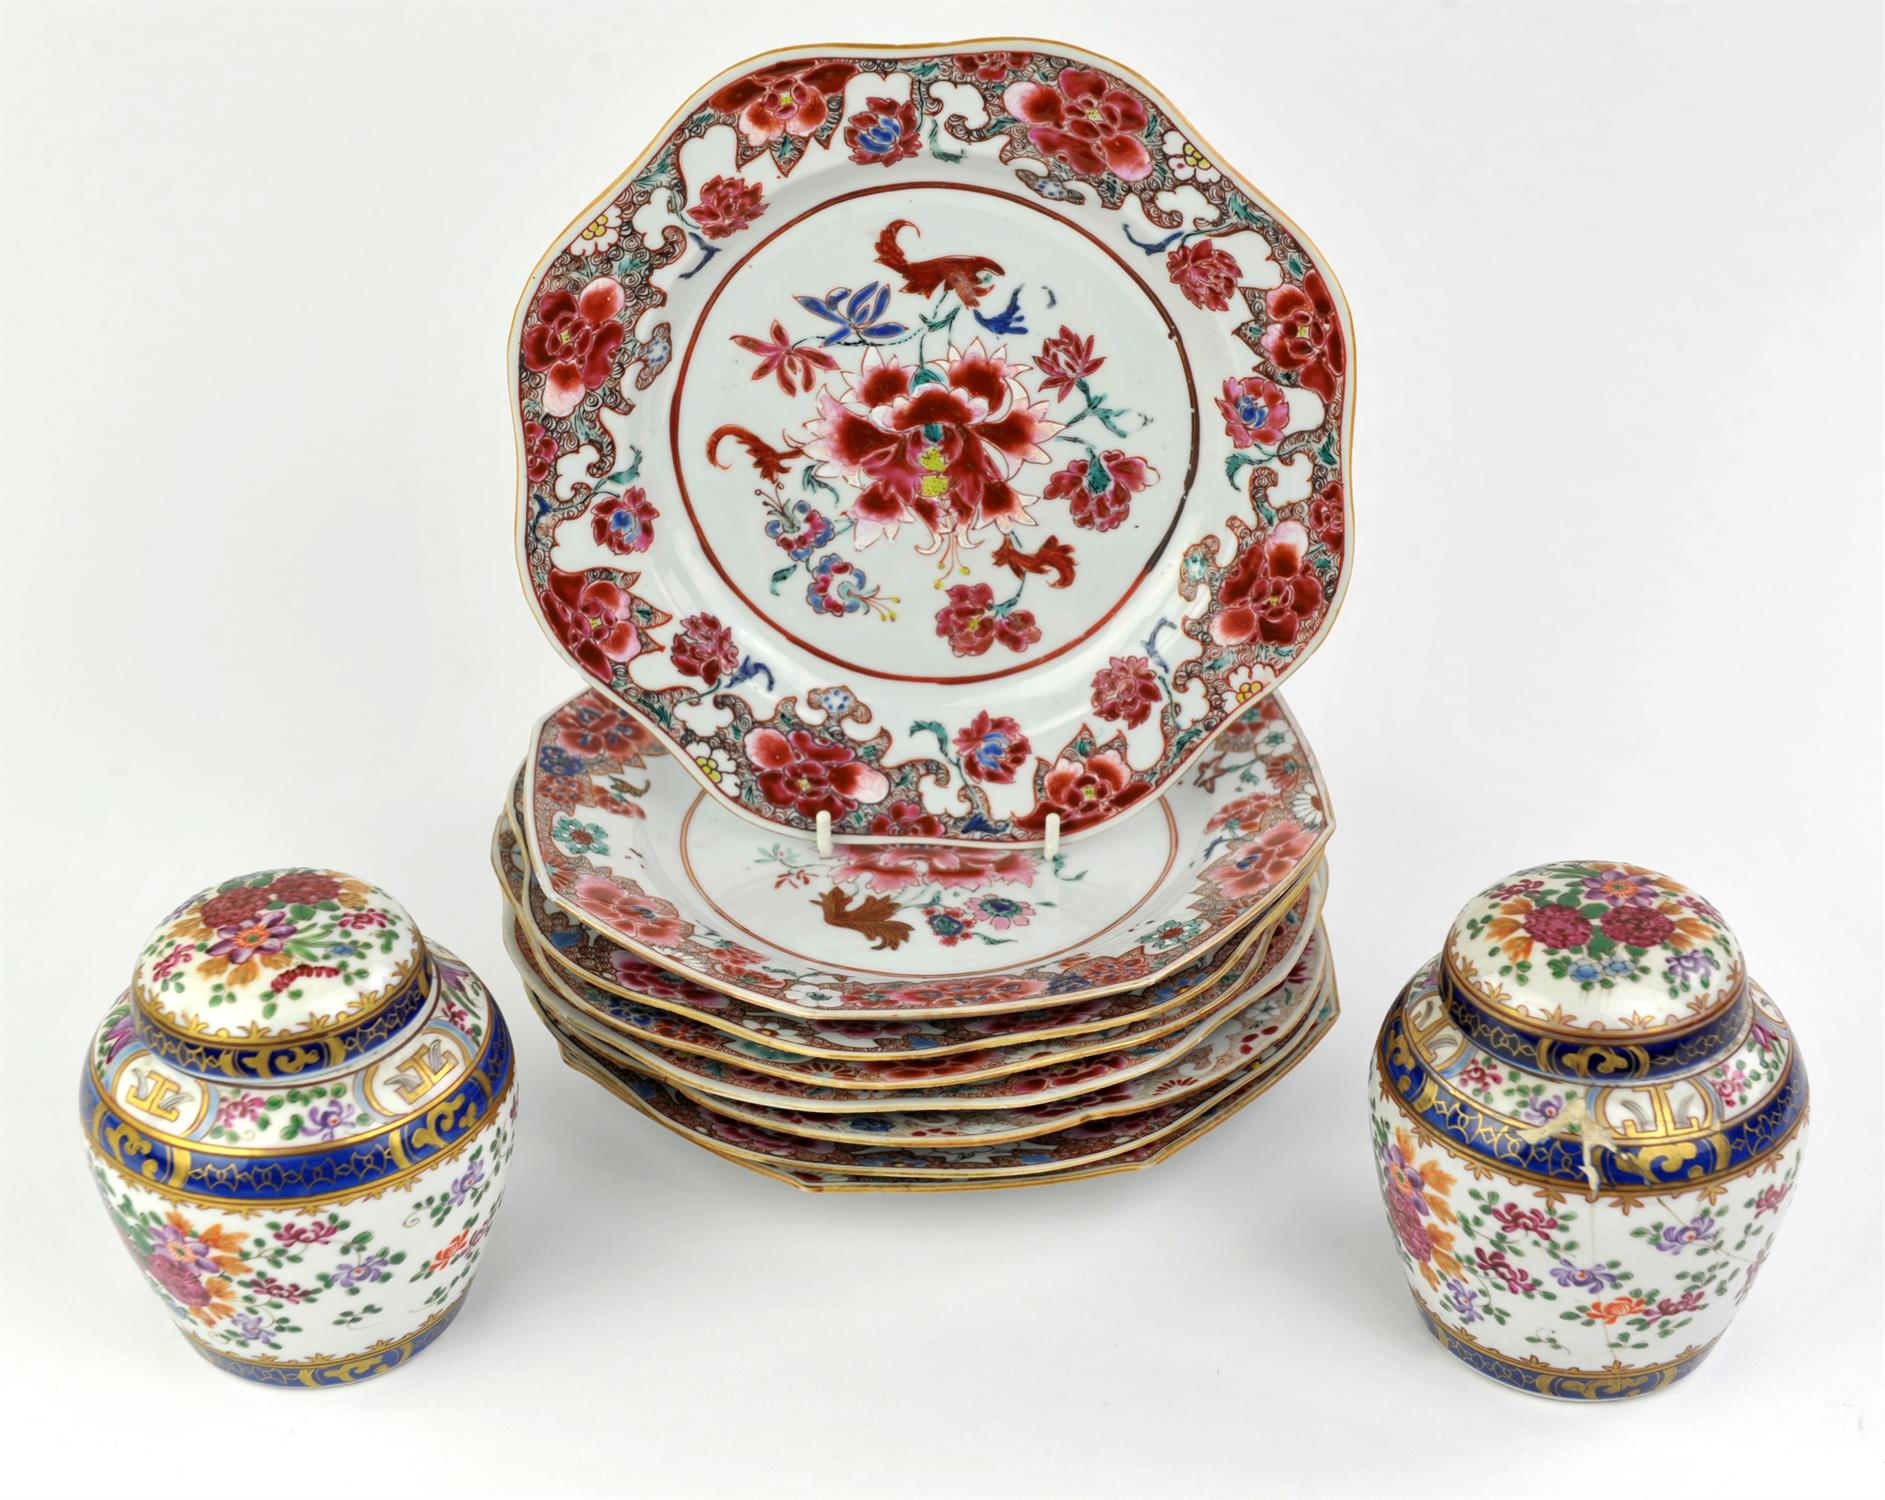 Eight famille rose dishes; each one decorated with floral designs and about 22.5 cm diameter, - Image 15 of 28